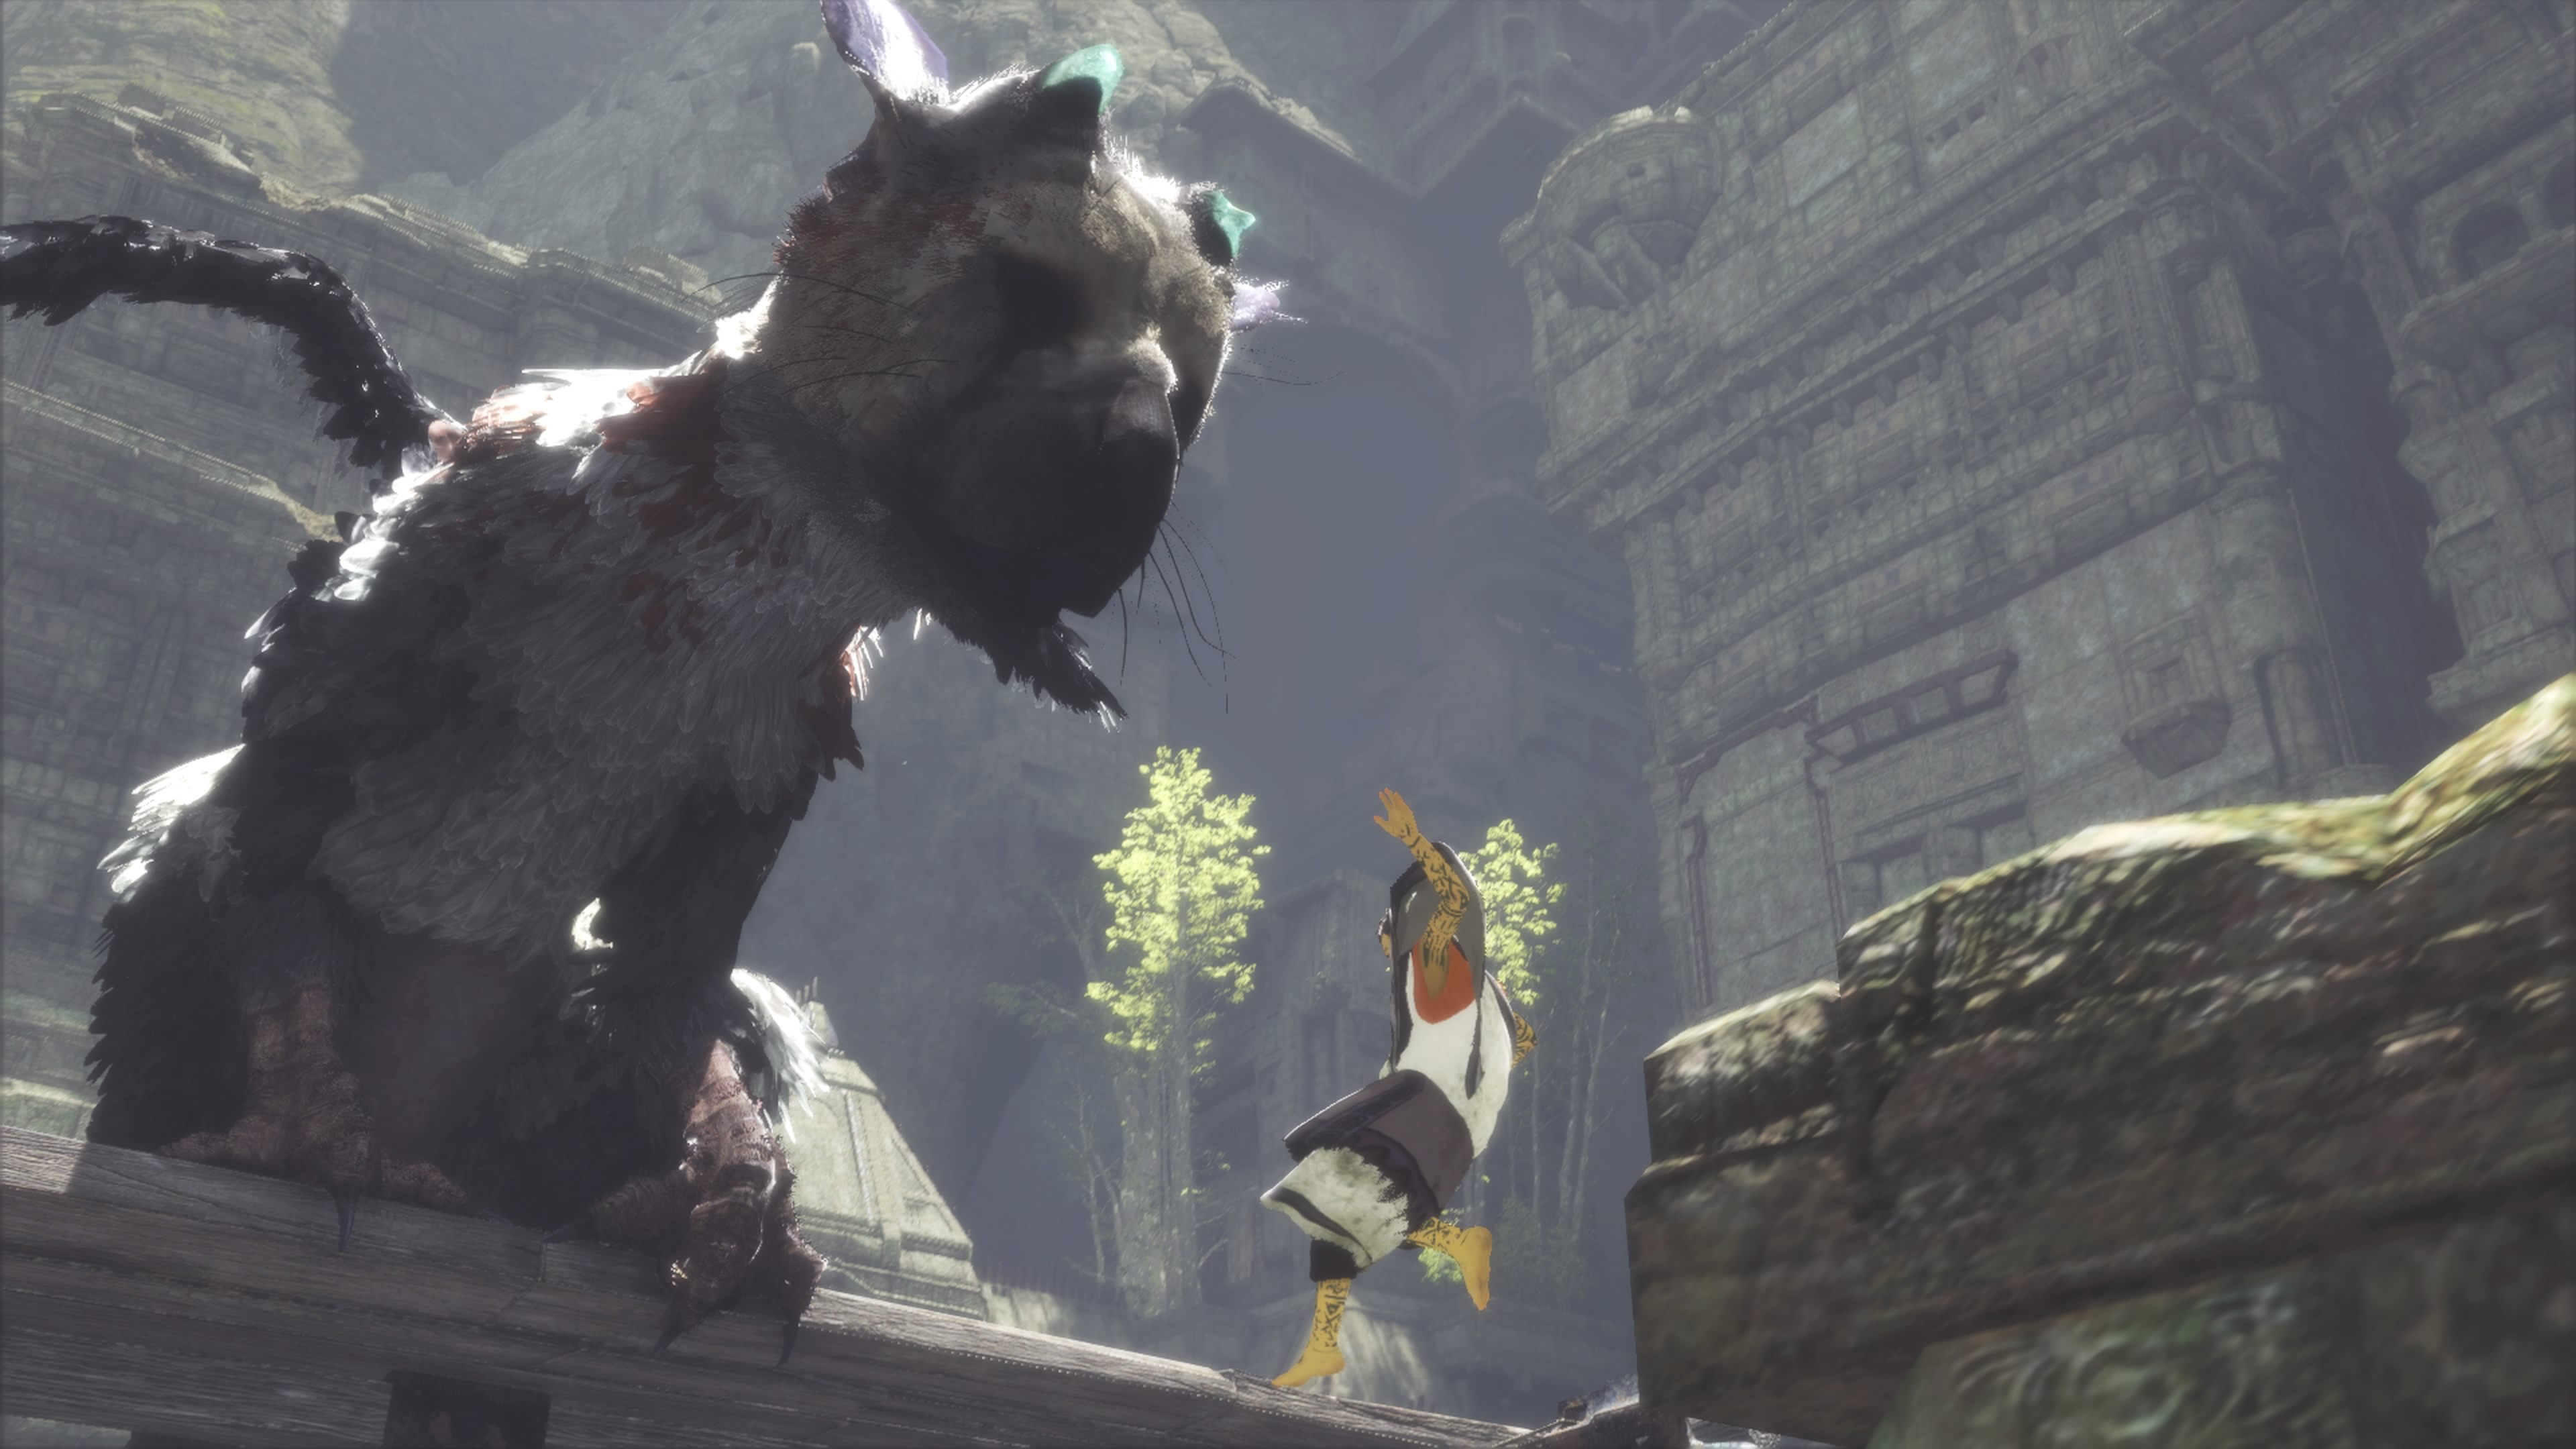 Trico from the last guardian